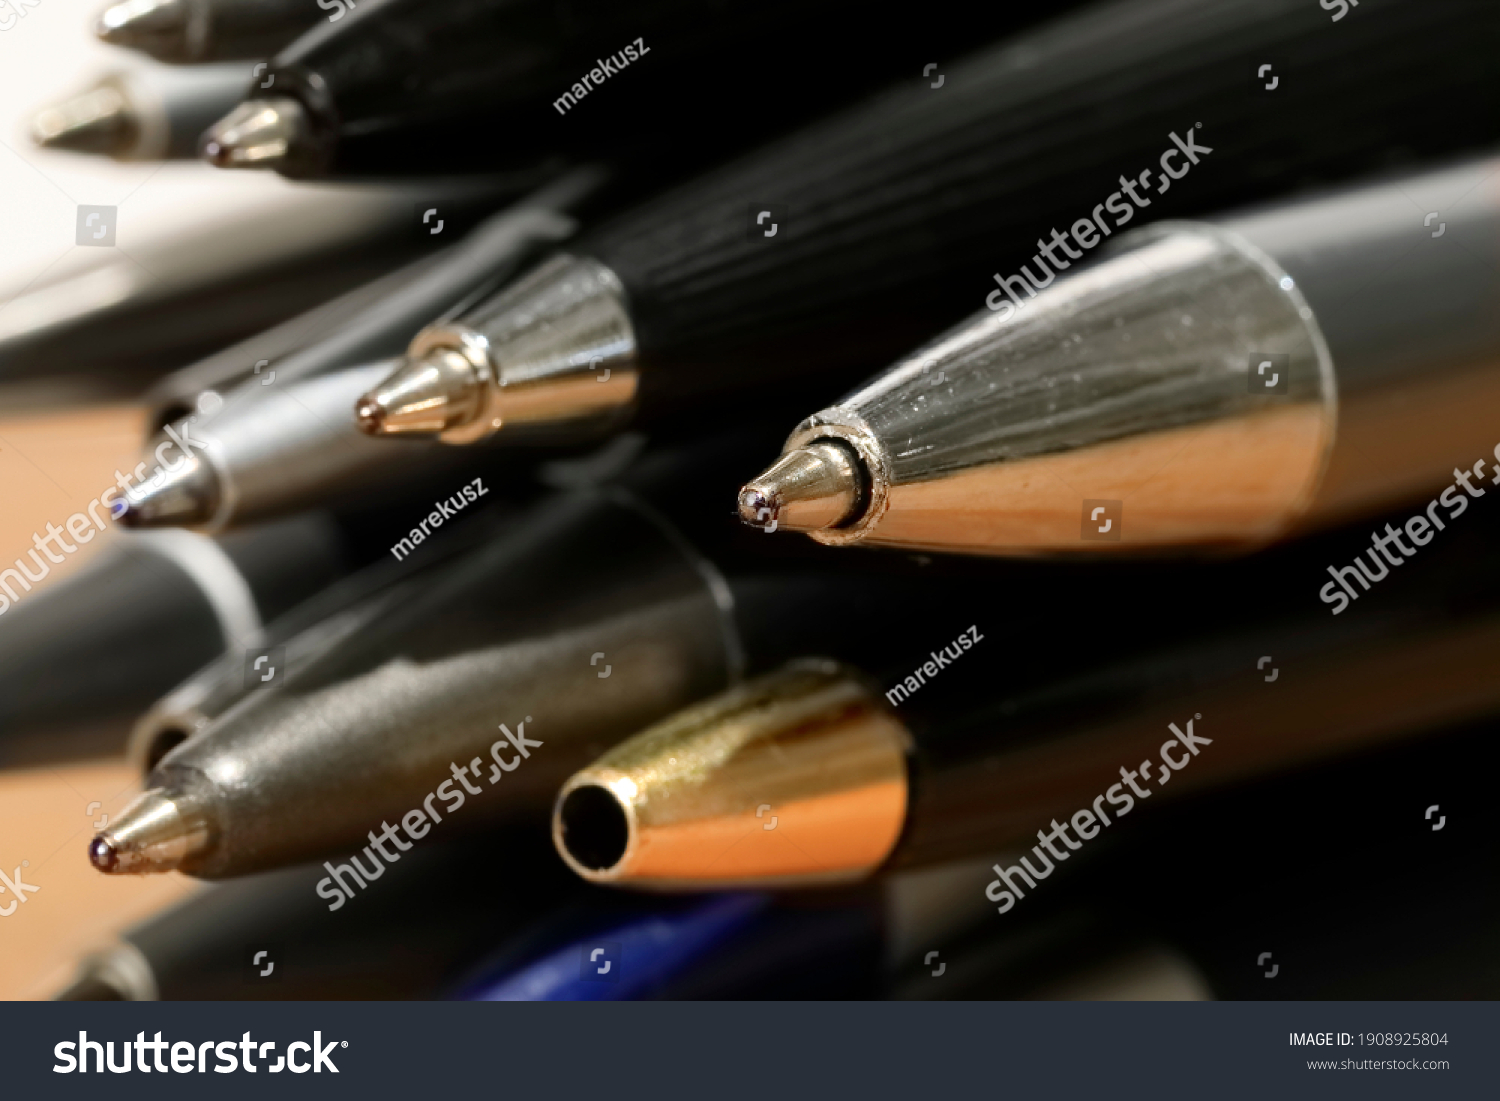 Some miscellaneous used ball pens in a pile. Office accessories. #1908925804